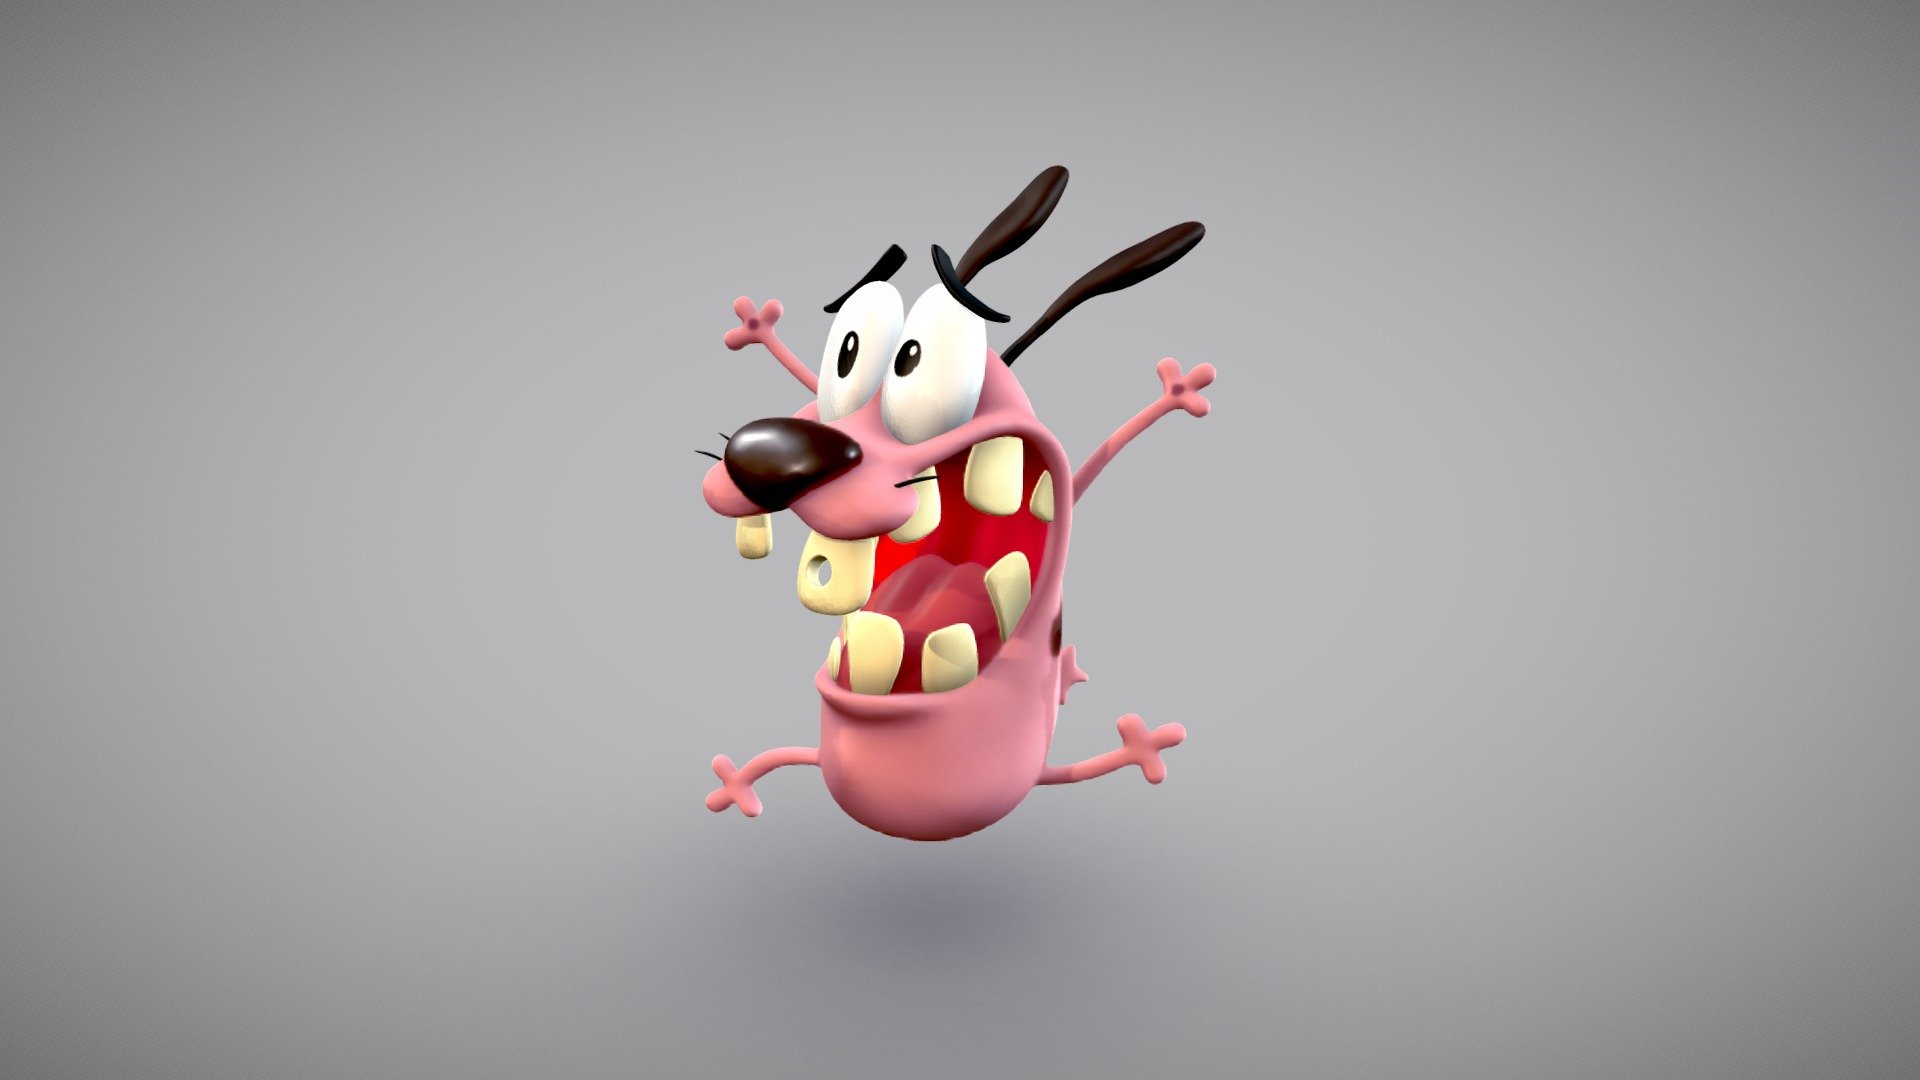 Courage the Cowardly Dog
Sculpted in Oculus Medium - Day 23 of Sculpt January 2019: Insanity - 3D model by illuminatty (@nattyice) 3d model